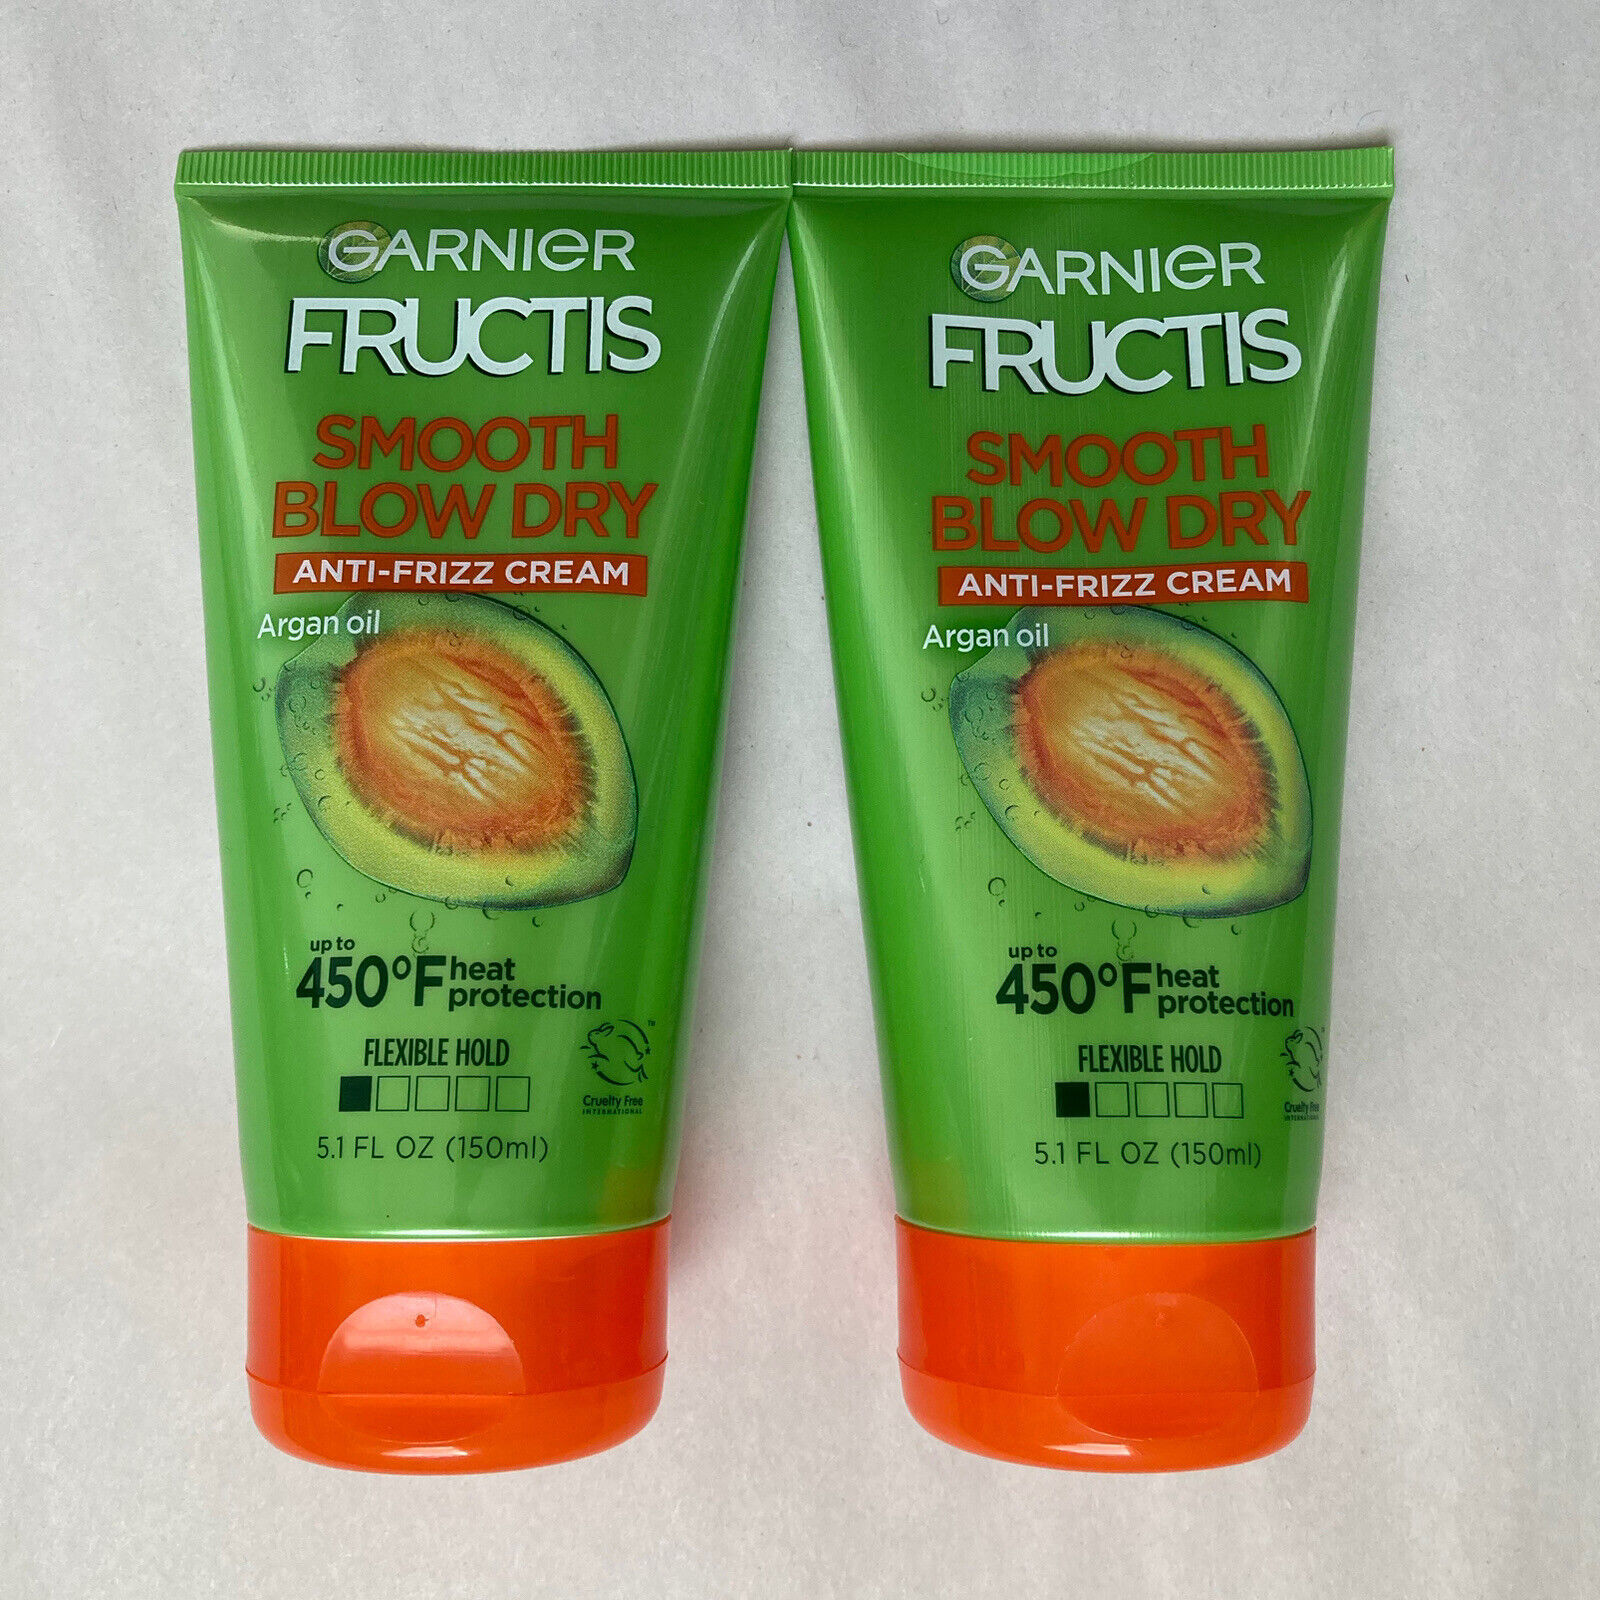 Primary image for 2x Garnier Fructis Smooth Blow Dry Anti-Frizz Cream Flexible Hold, 5.1 fl oz ea